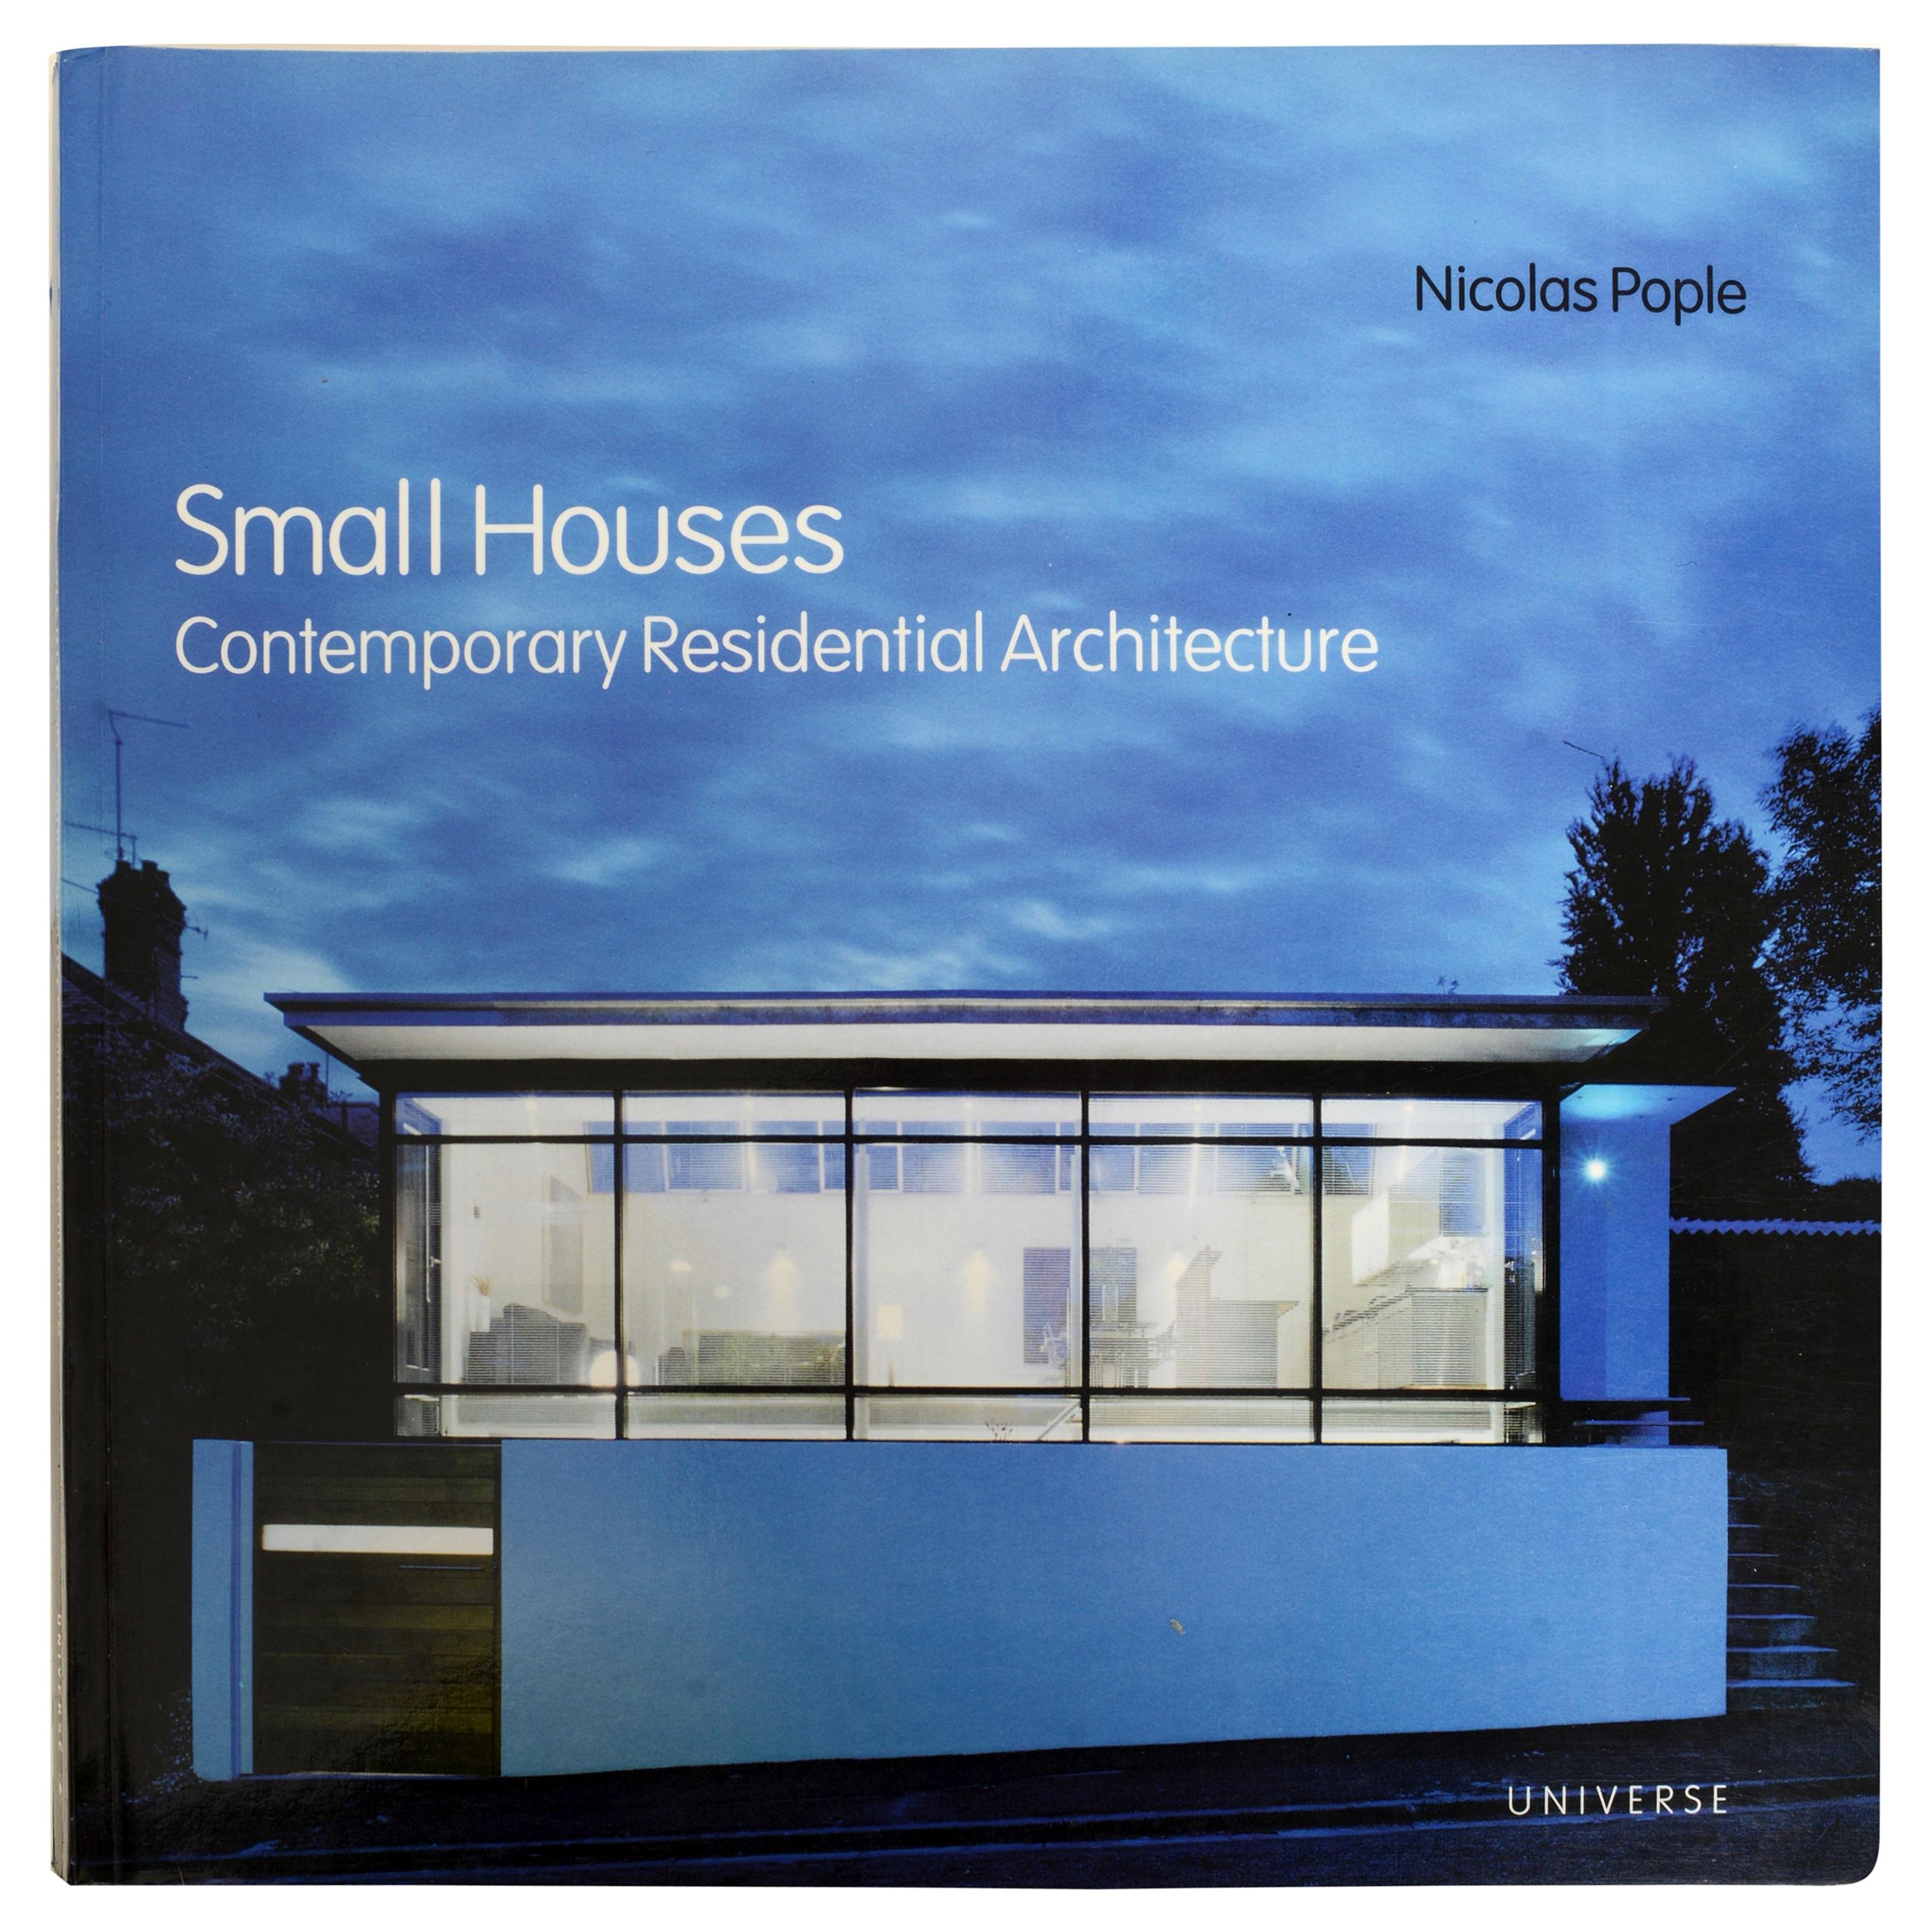 Small Houses Contemporary Residential Architecture, by Nicolas Pople